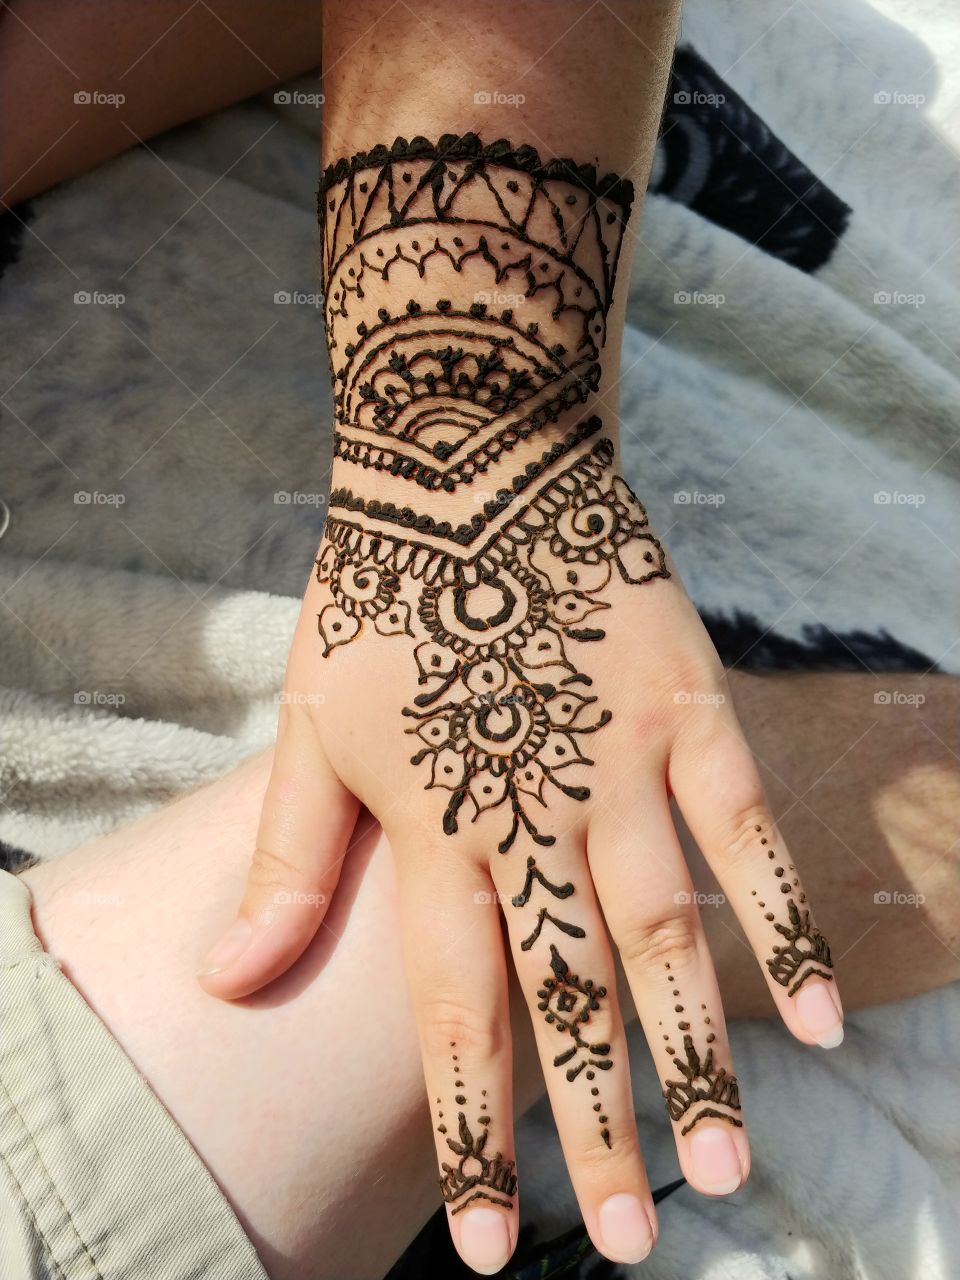 my girlfriend bought some henna and wantes me to give her something cool and complicated so i did my best with what i could find.